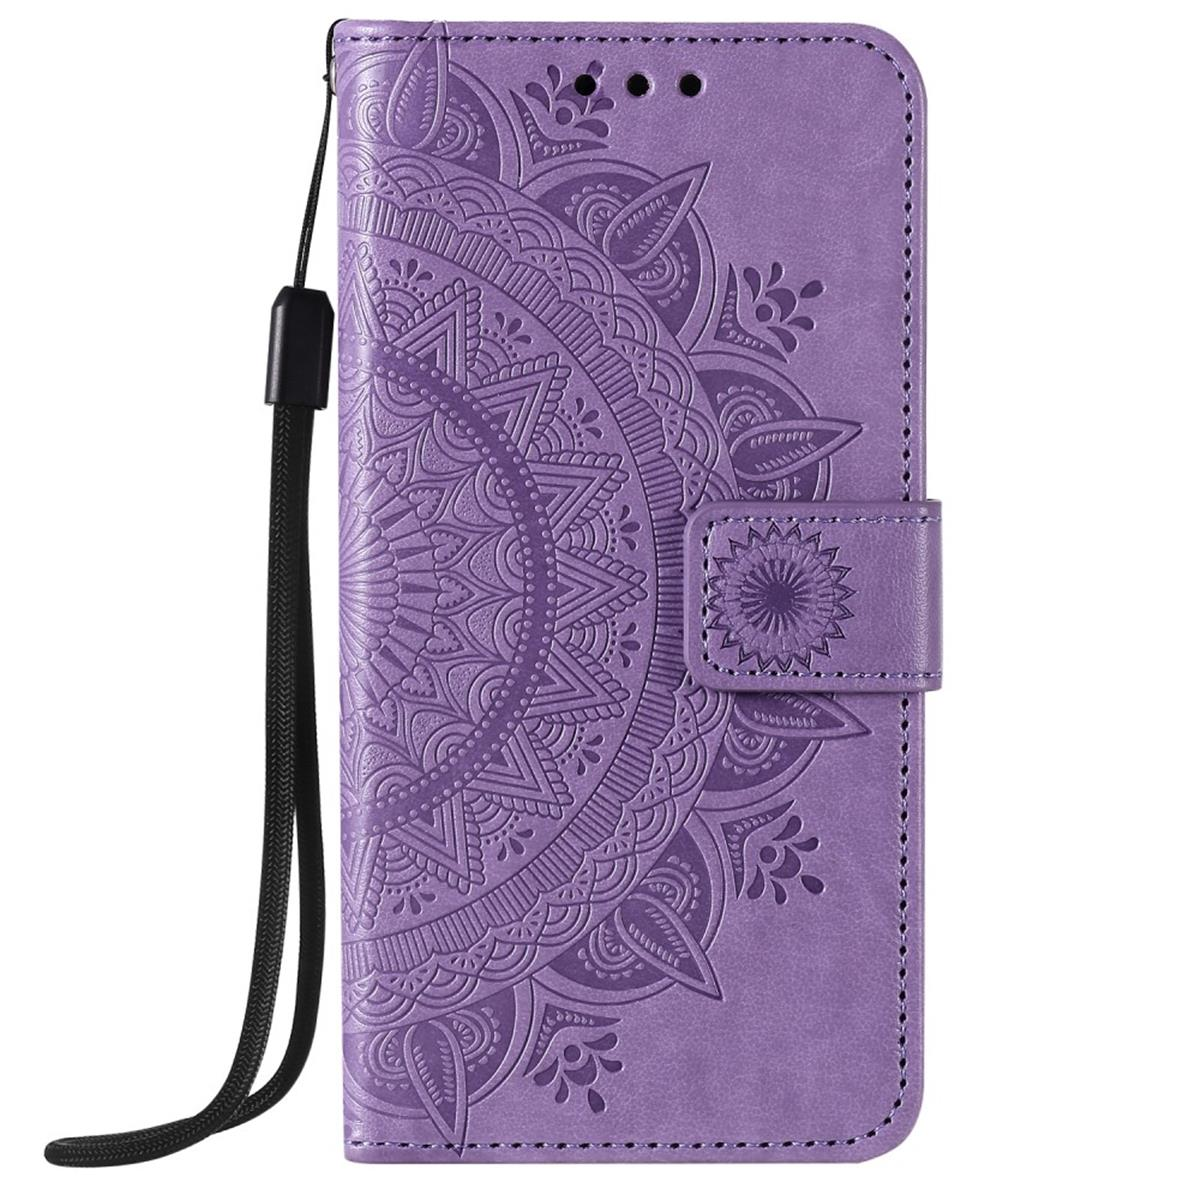 COVERKINGZ Klapphülle mit Mandala Muster, Lila Bookcover, iPhone Pro 12 Apple, Max